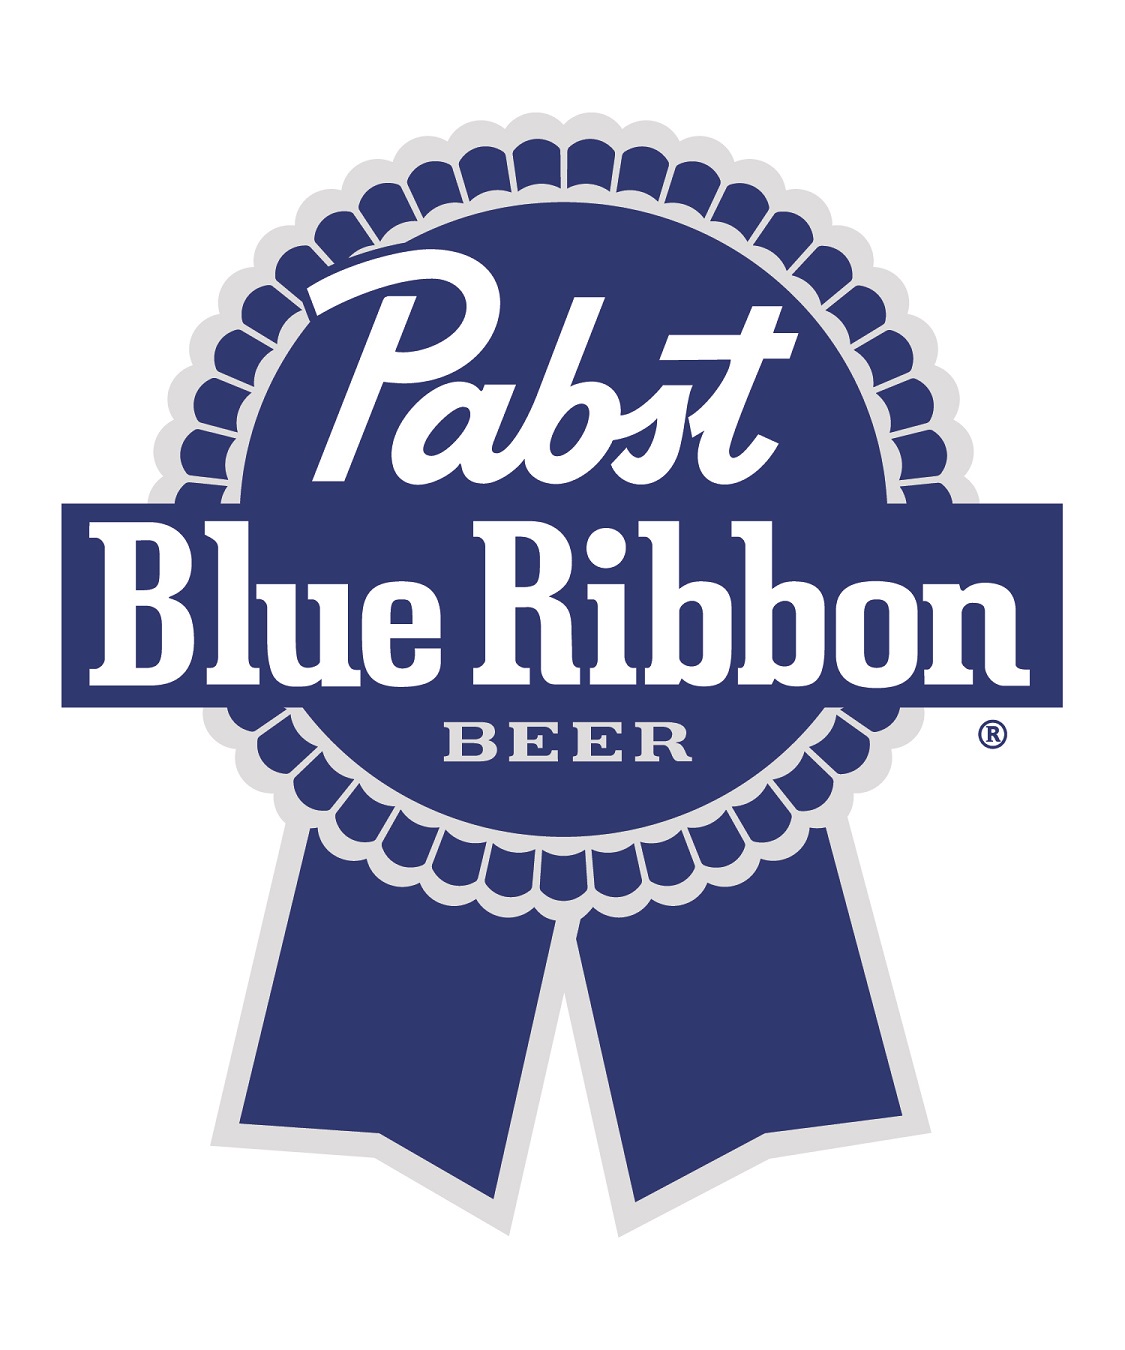 PBR makes your belly happy!